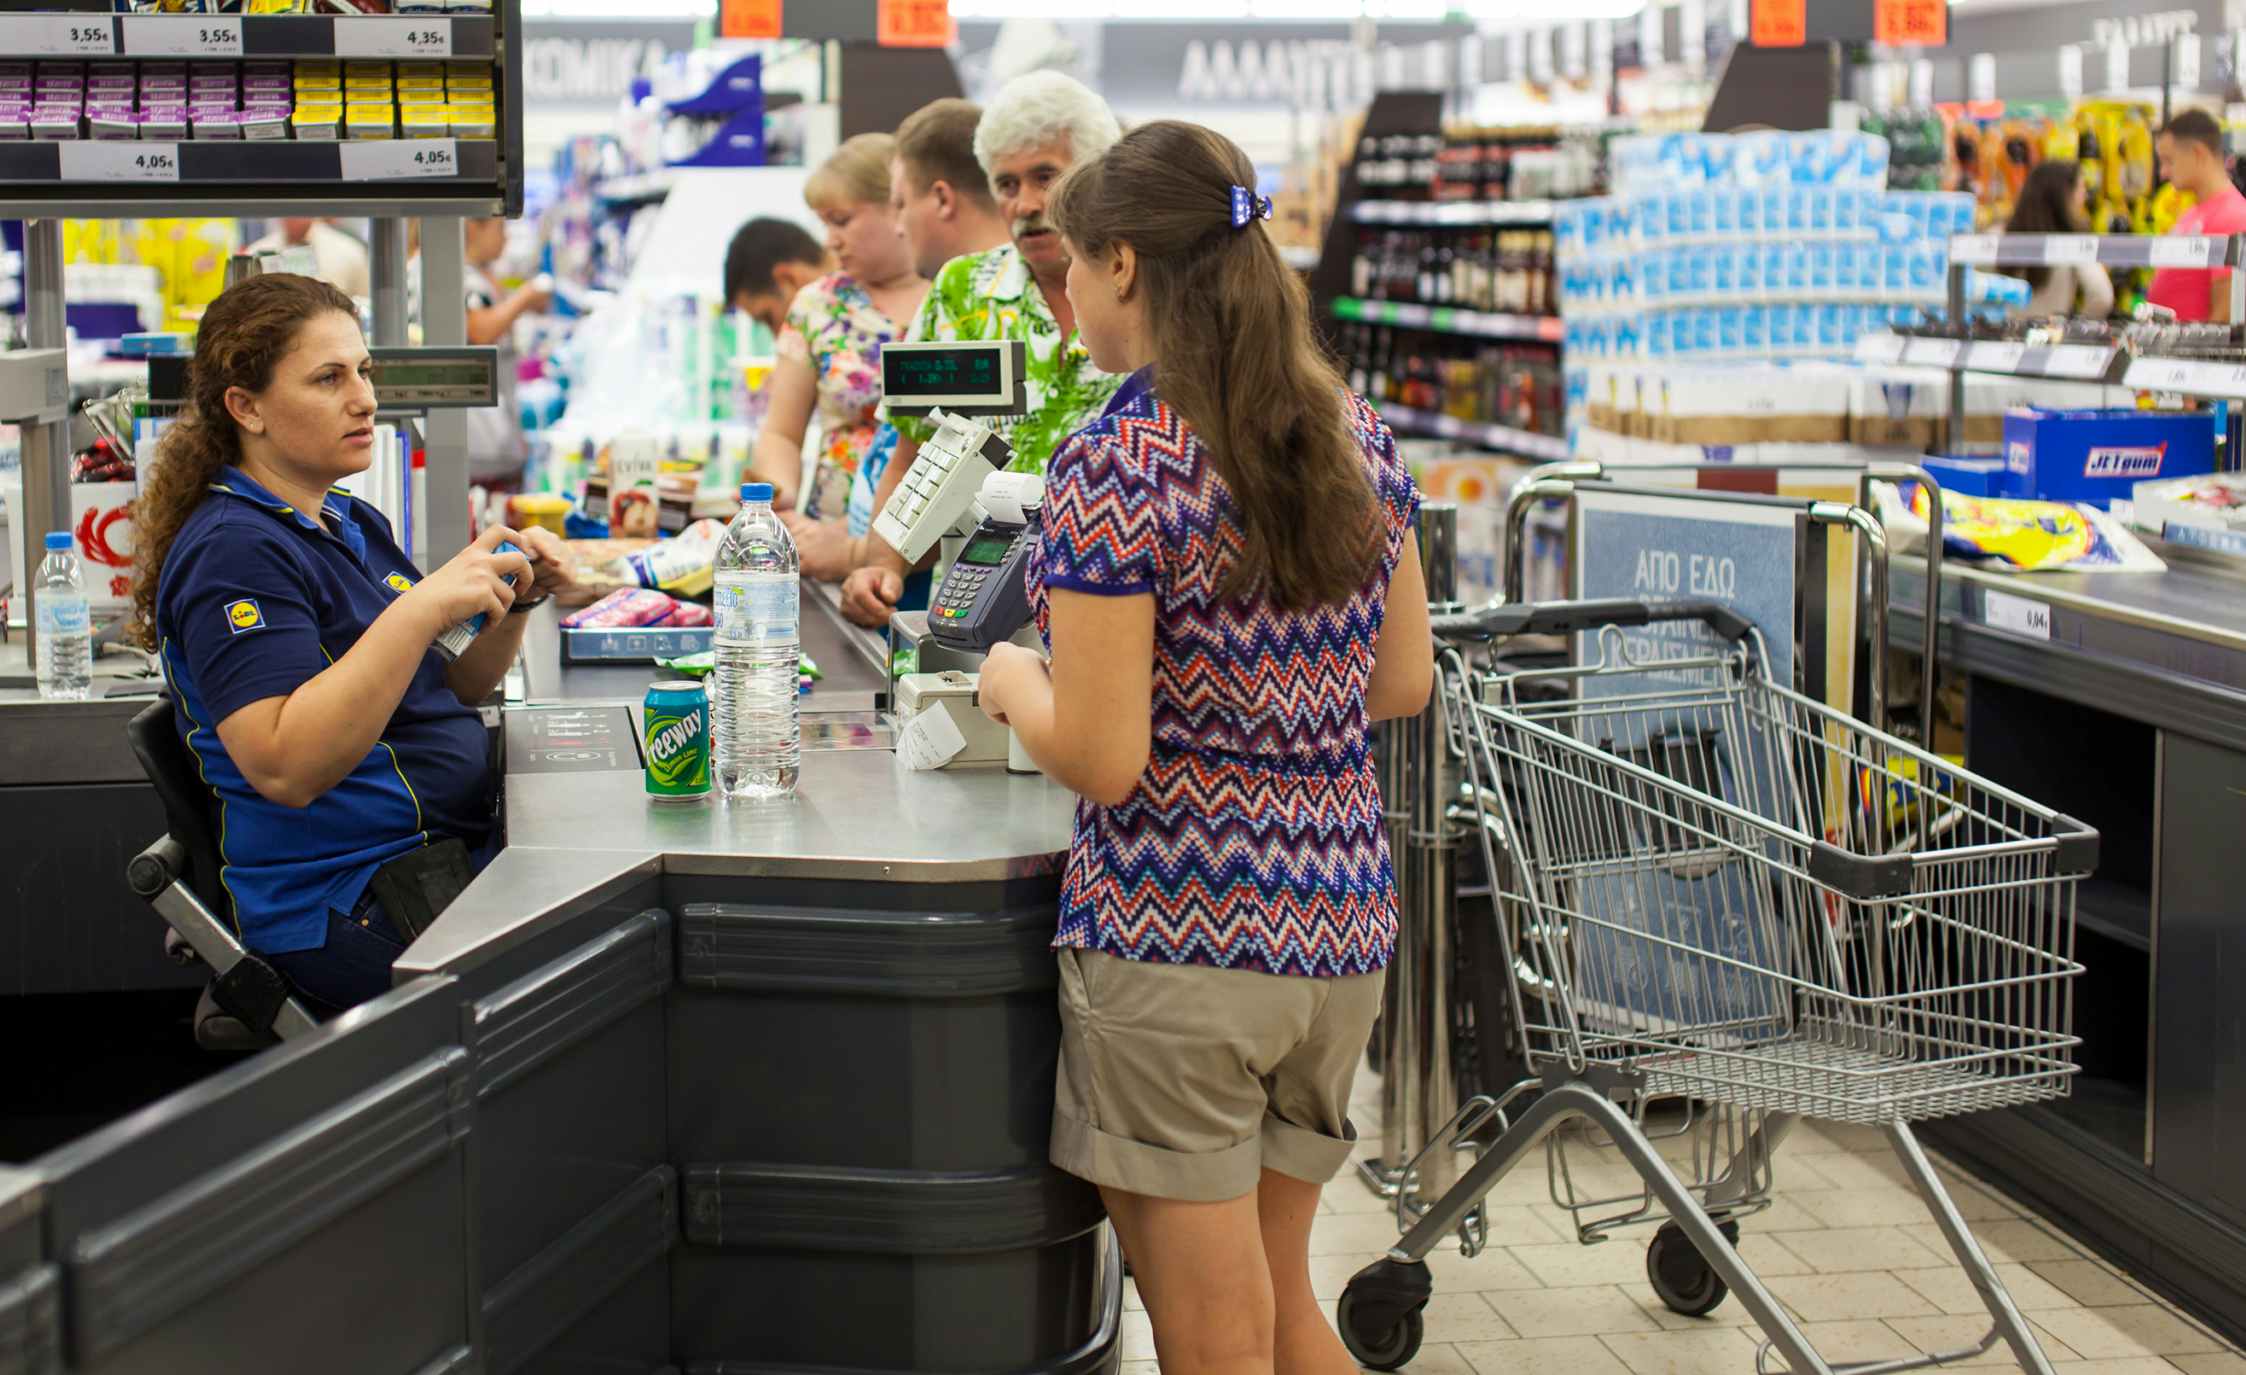 Customers paying for shopping at a supermarket. Line at the cashdesks in the supermarket